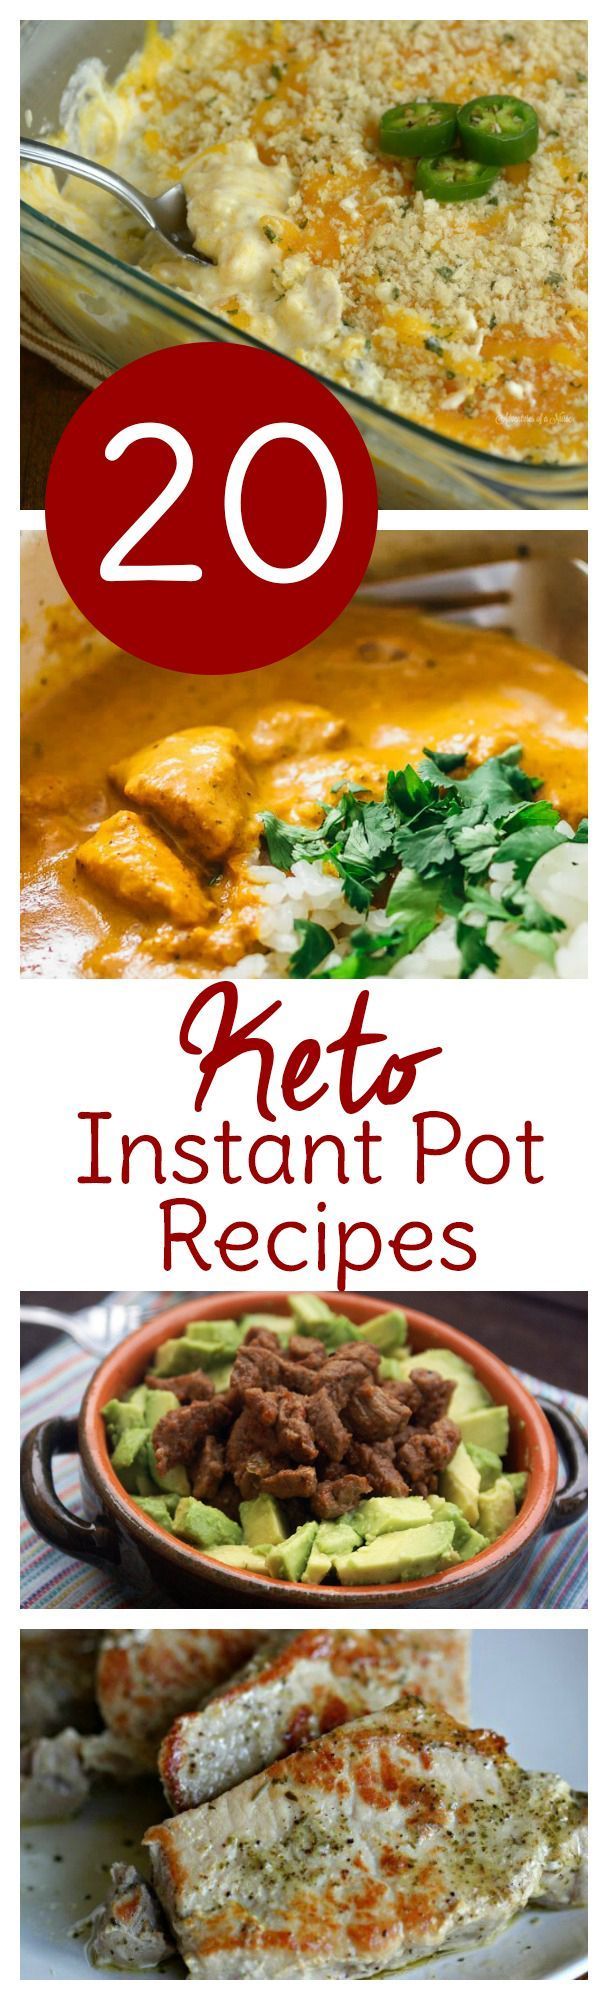 Break out your Instant Pot and make your ketogenic diet even simpler! 20 Instant Pot keto recipes perfect for dinner or anytime!